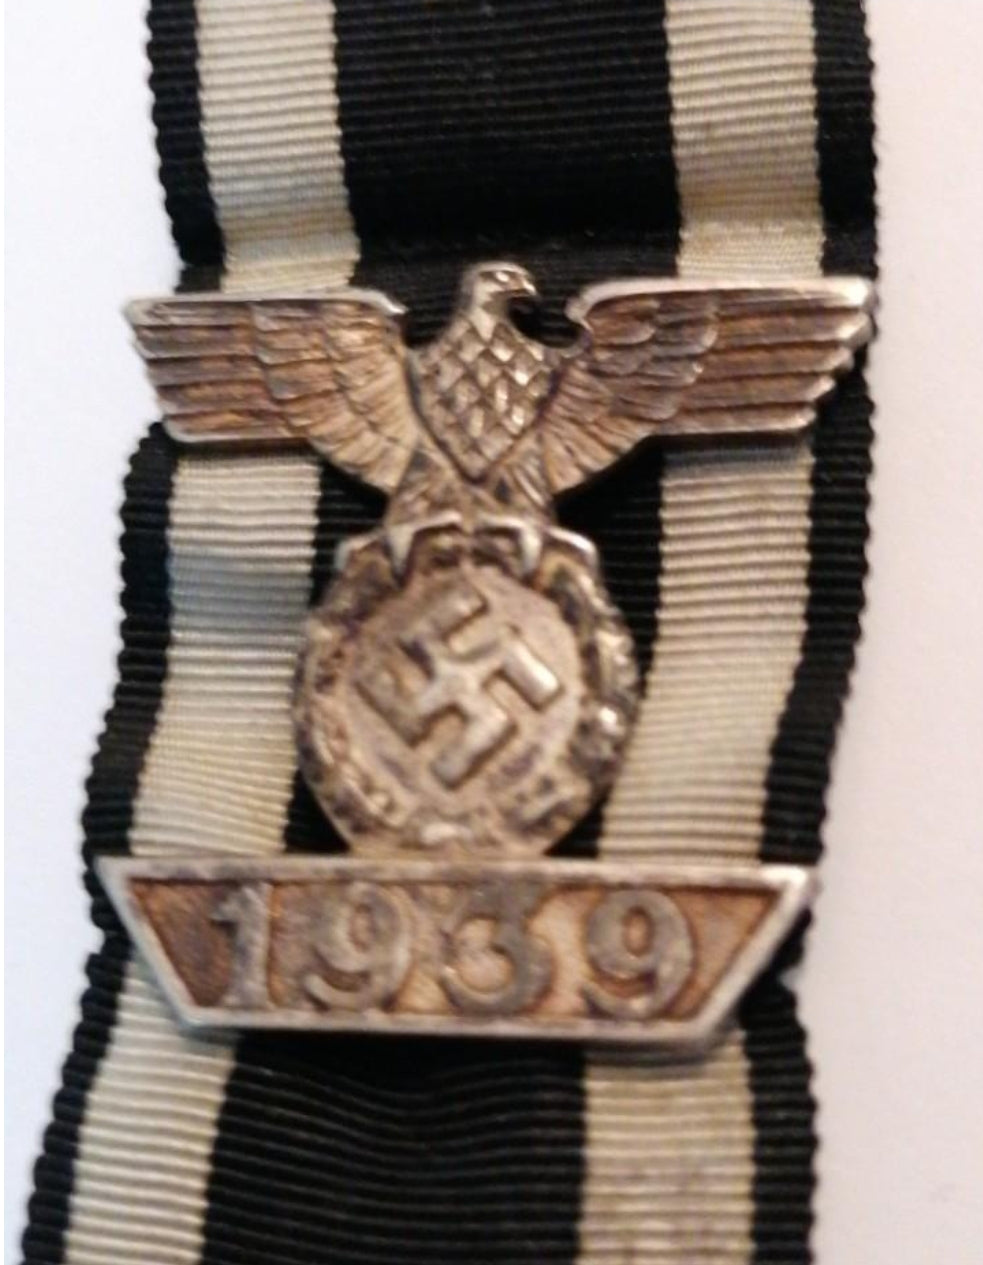 1939 repeat pin for Germany Prussia's WWII Iron Cross